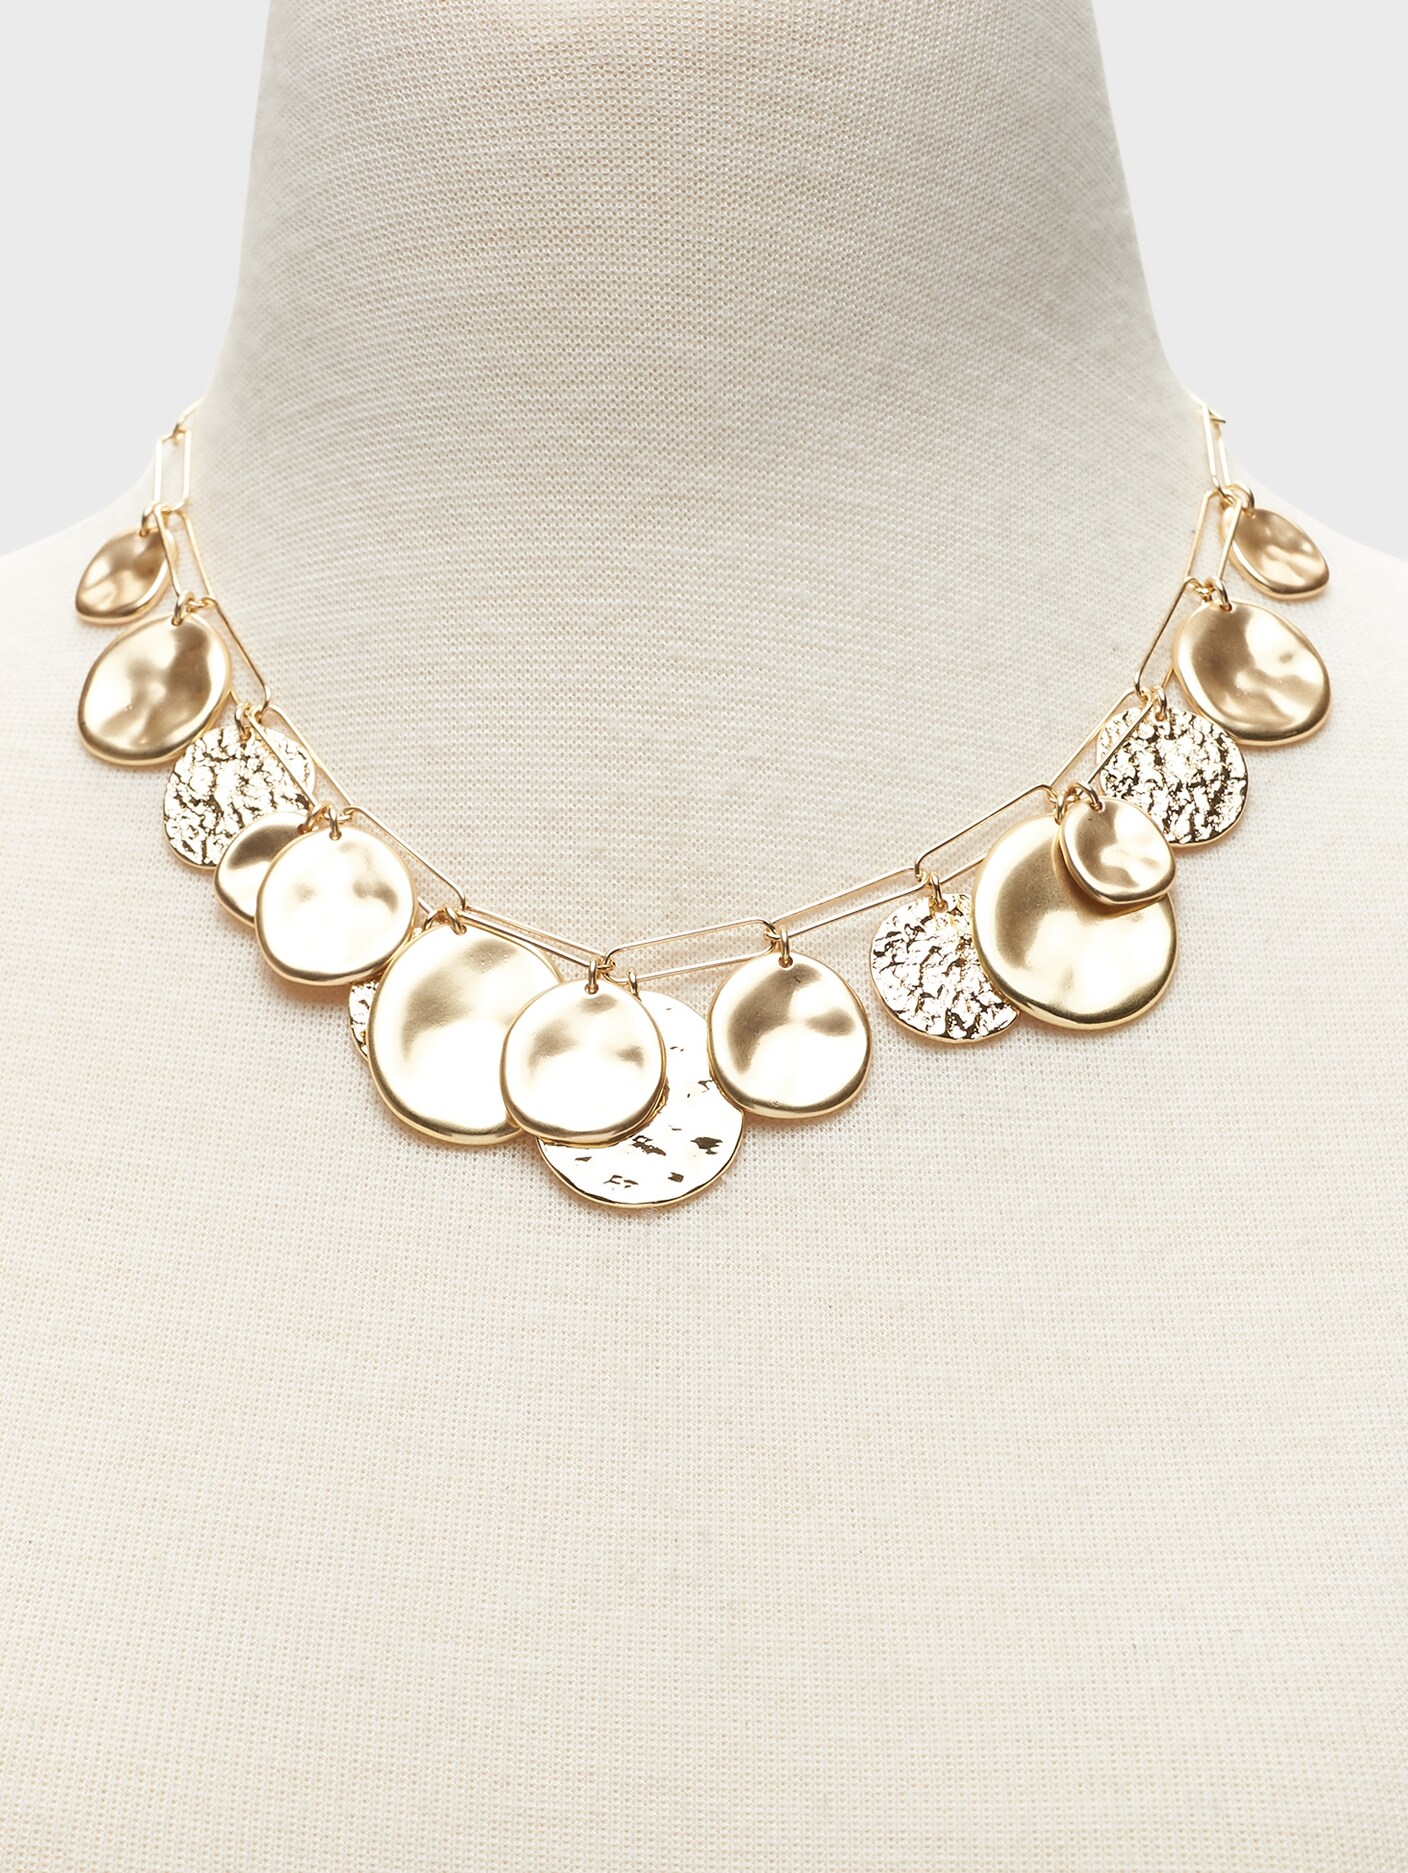 Mixed Metal Statement Necklace